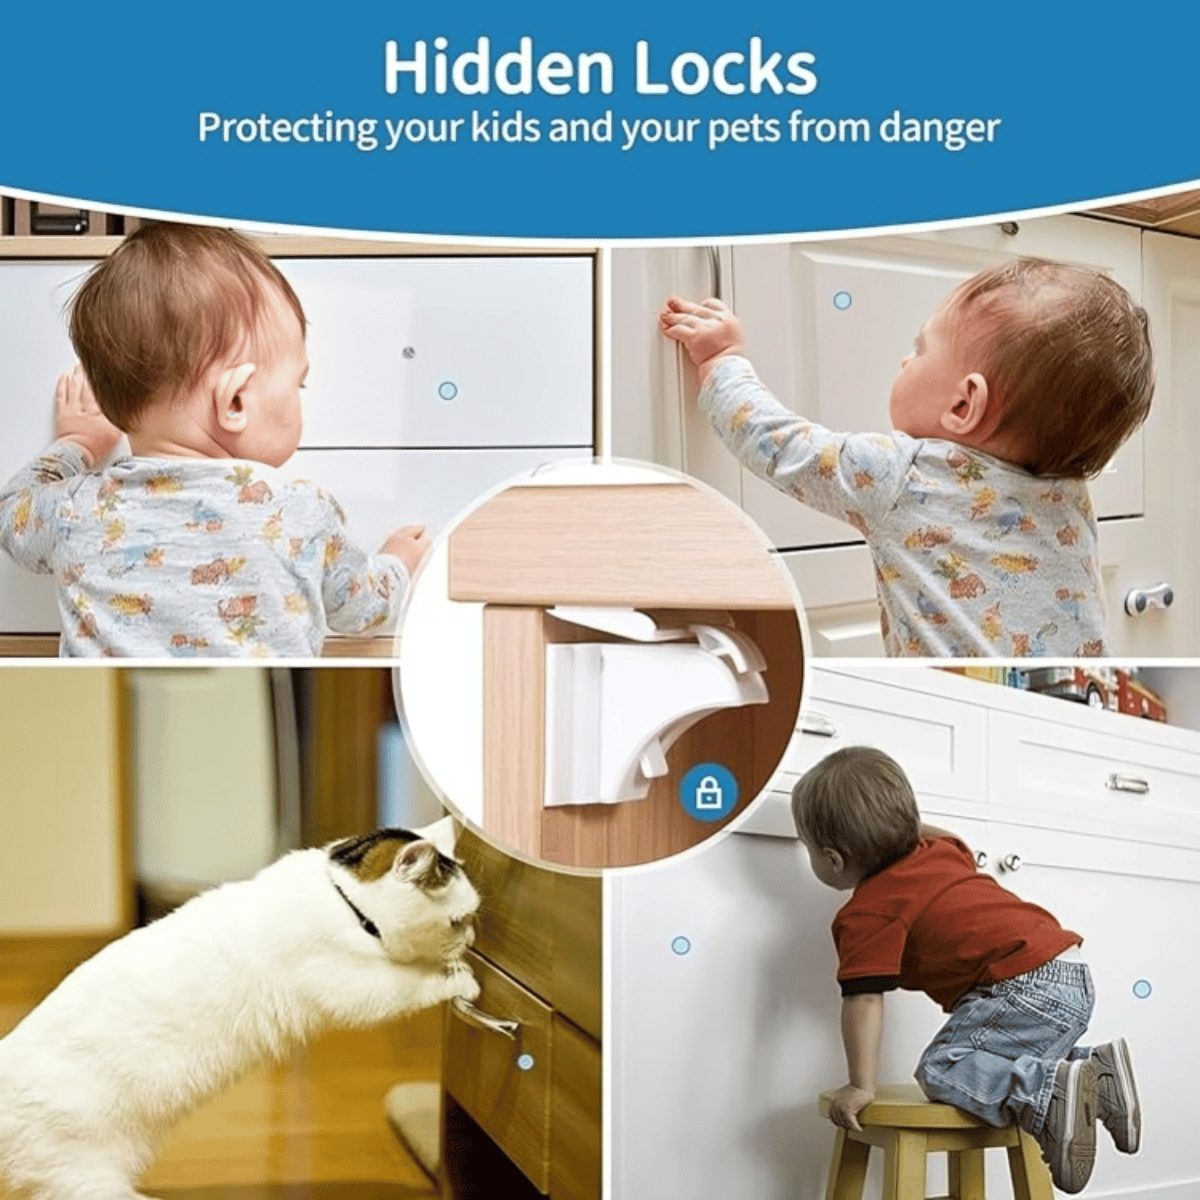 Magnetic Baby Proofing Cabinet Locks 12-Pack - 🎉 50% OFF TODAY - Skaldo & Malin